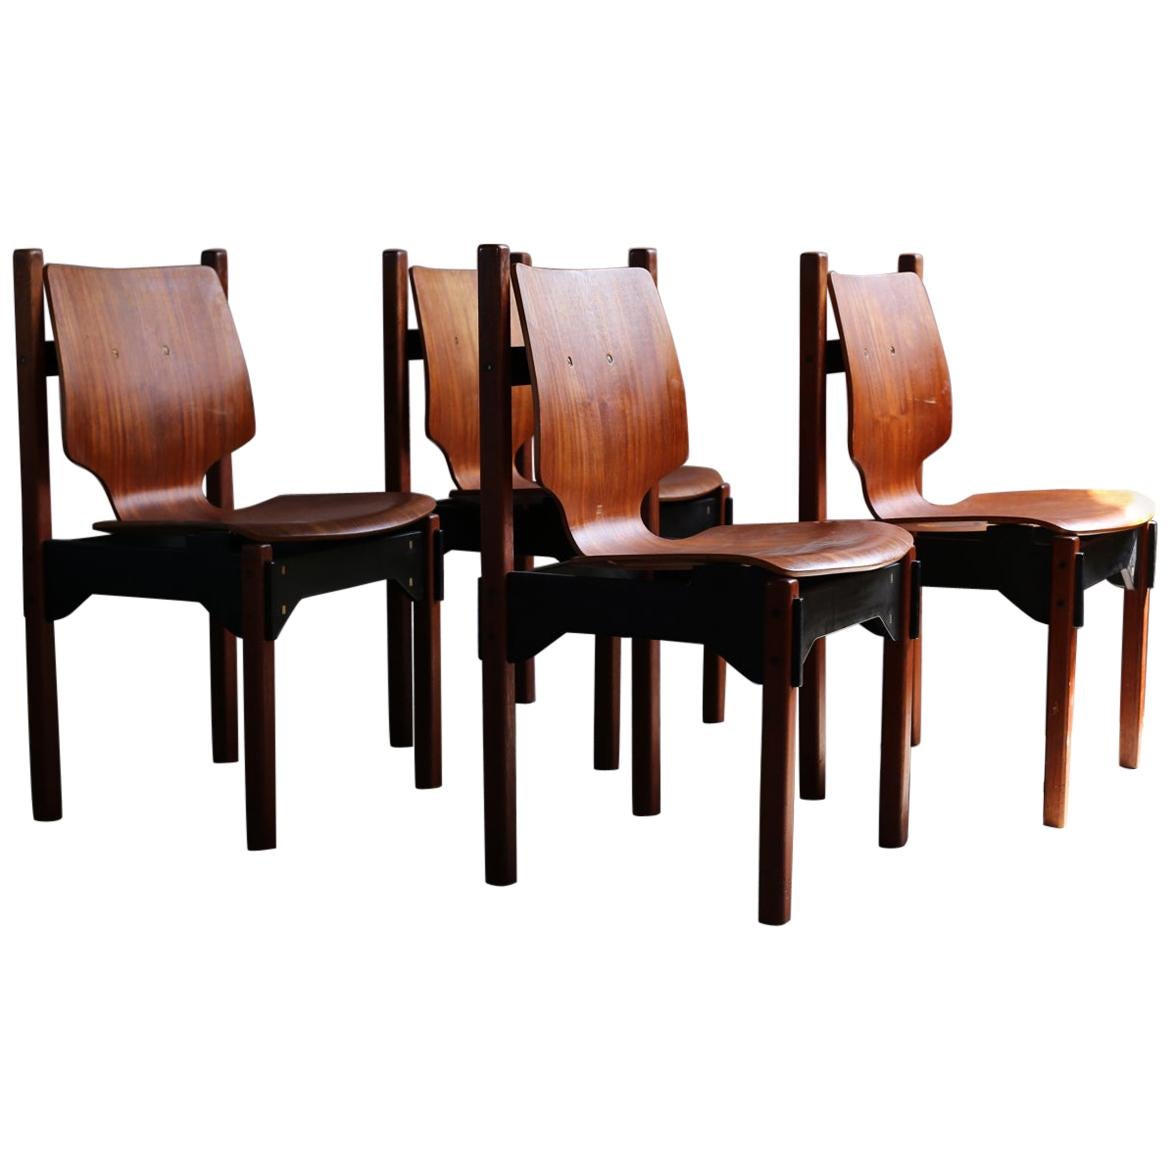 Set of 4 Vintage Danish Dining Chairs